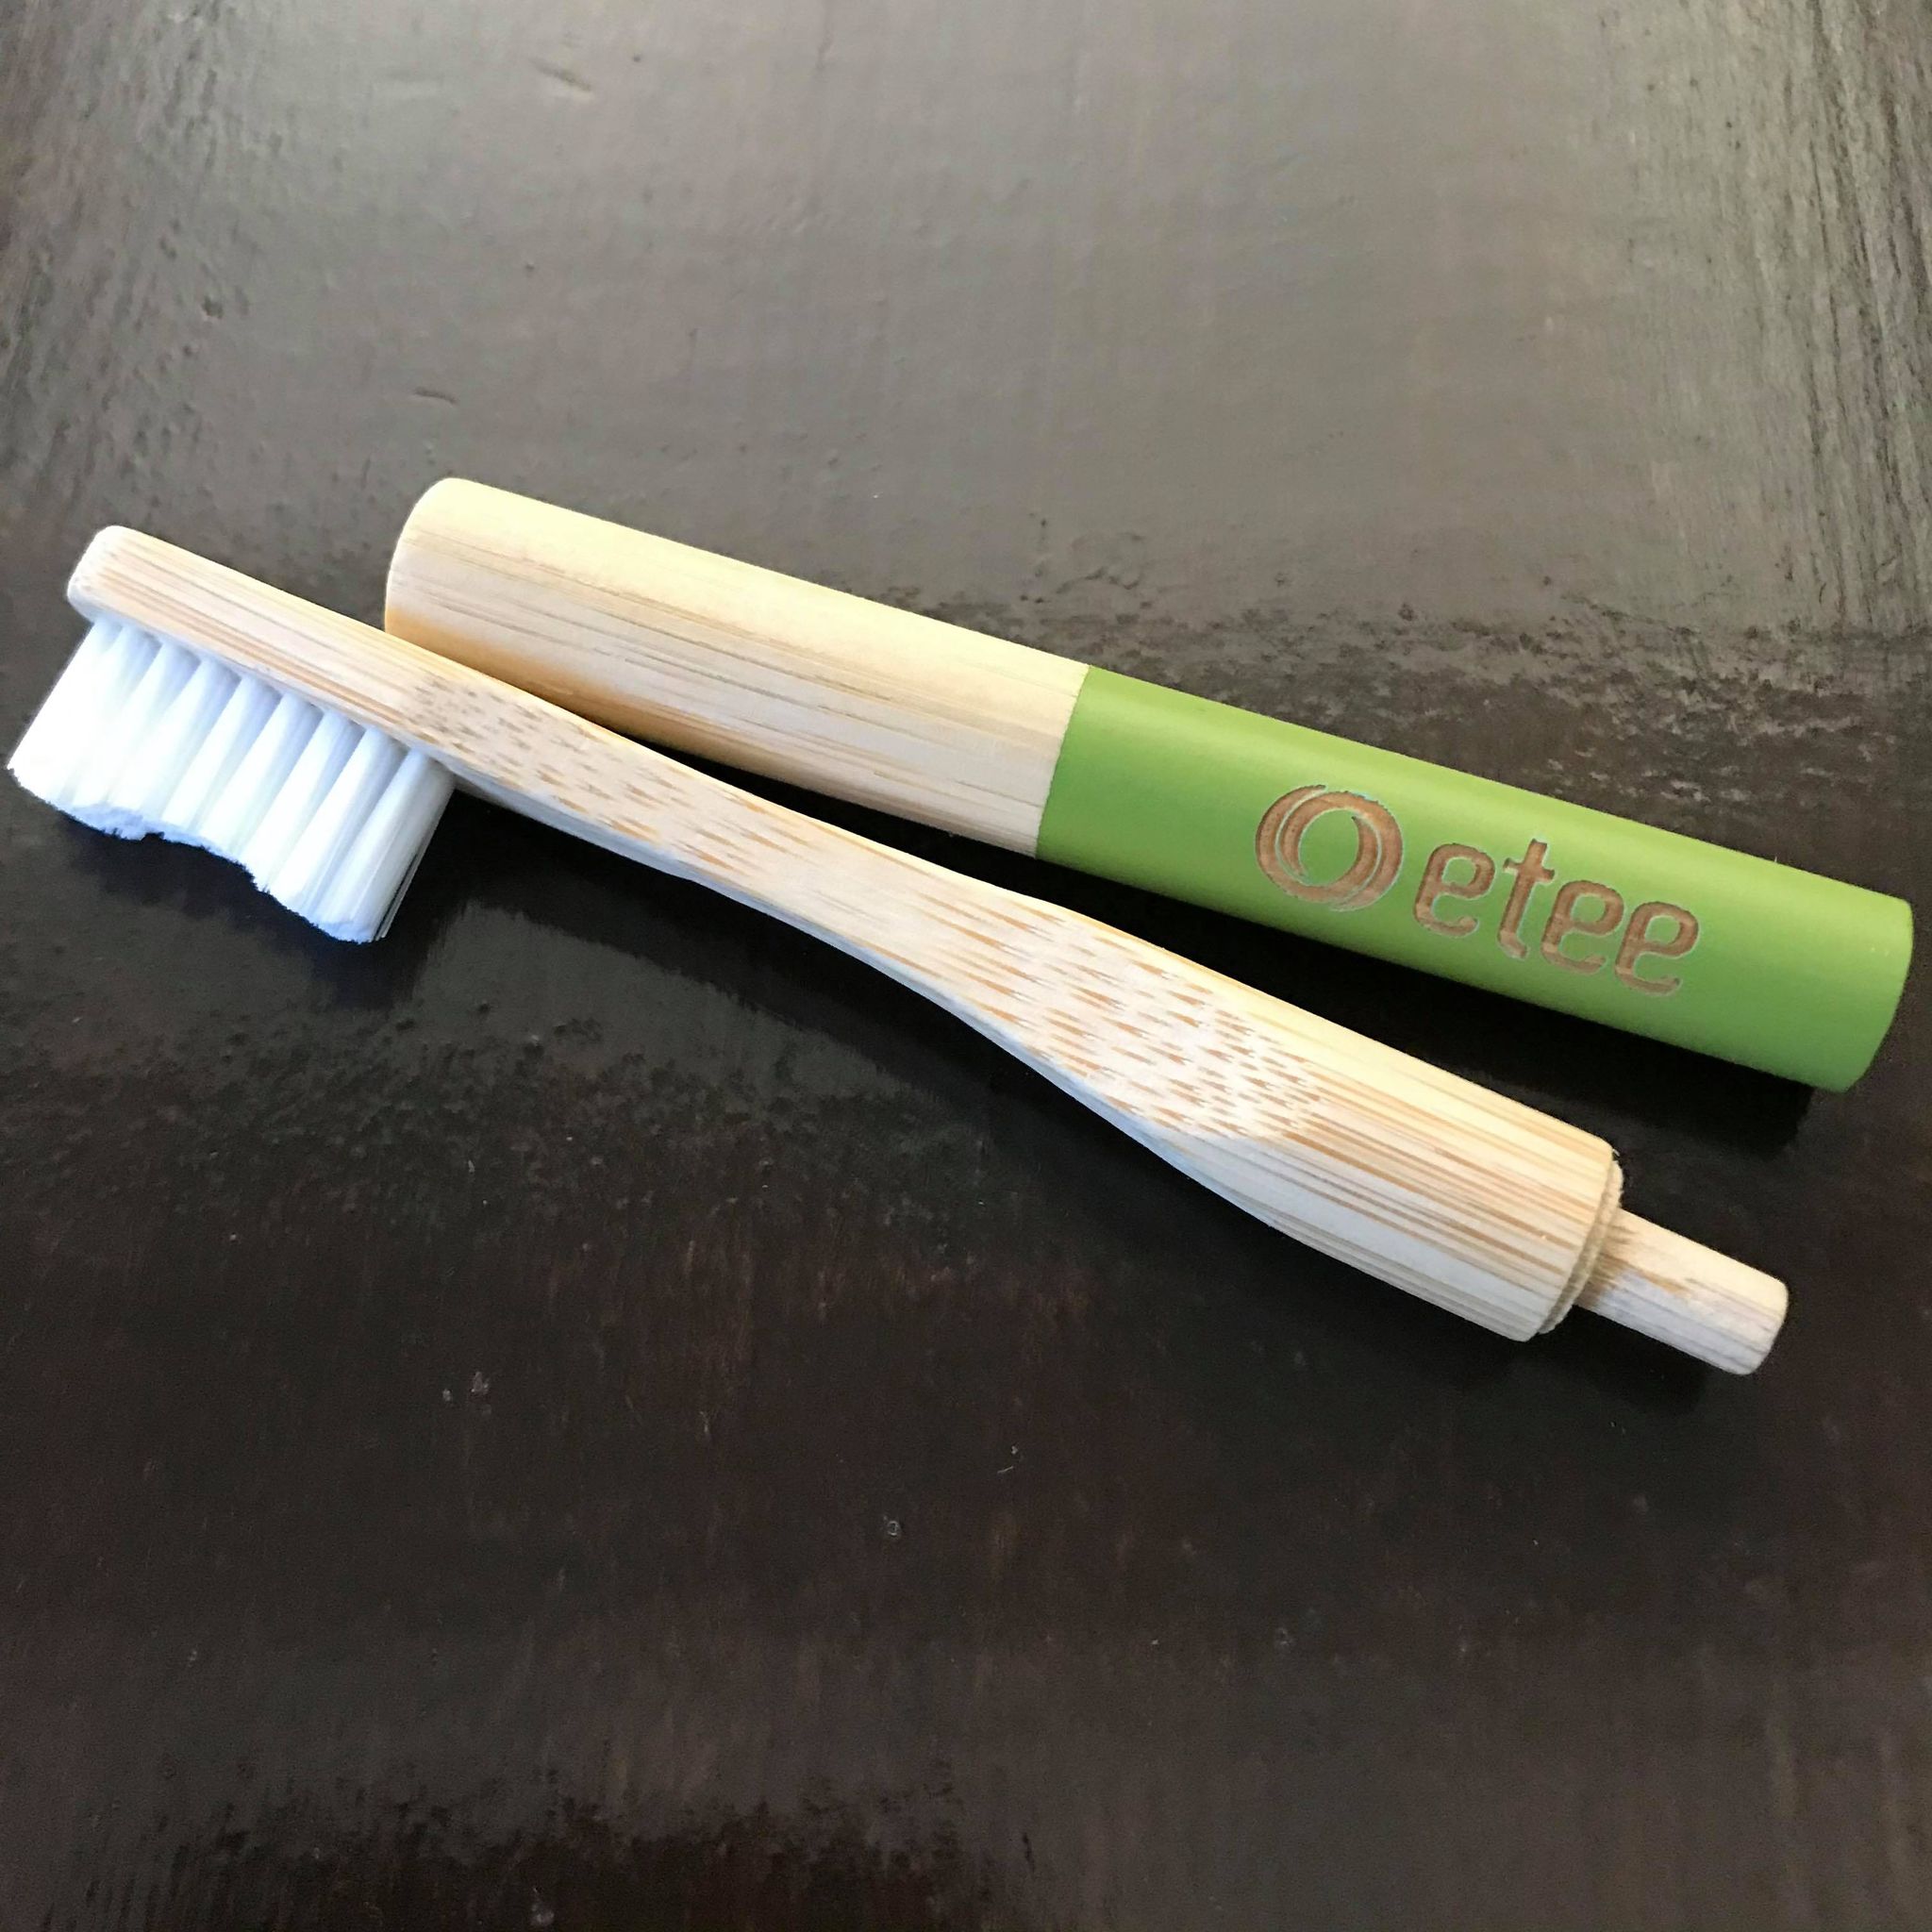 Replaceable head toothbrush by etee